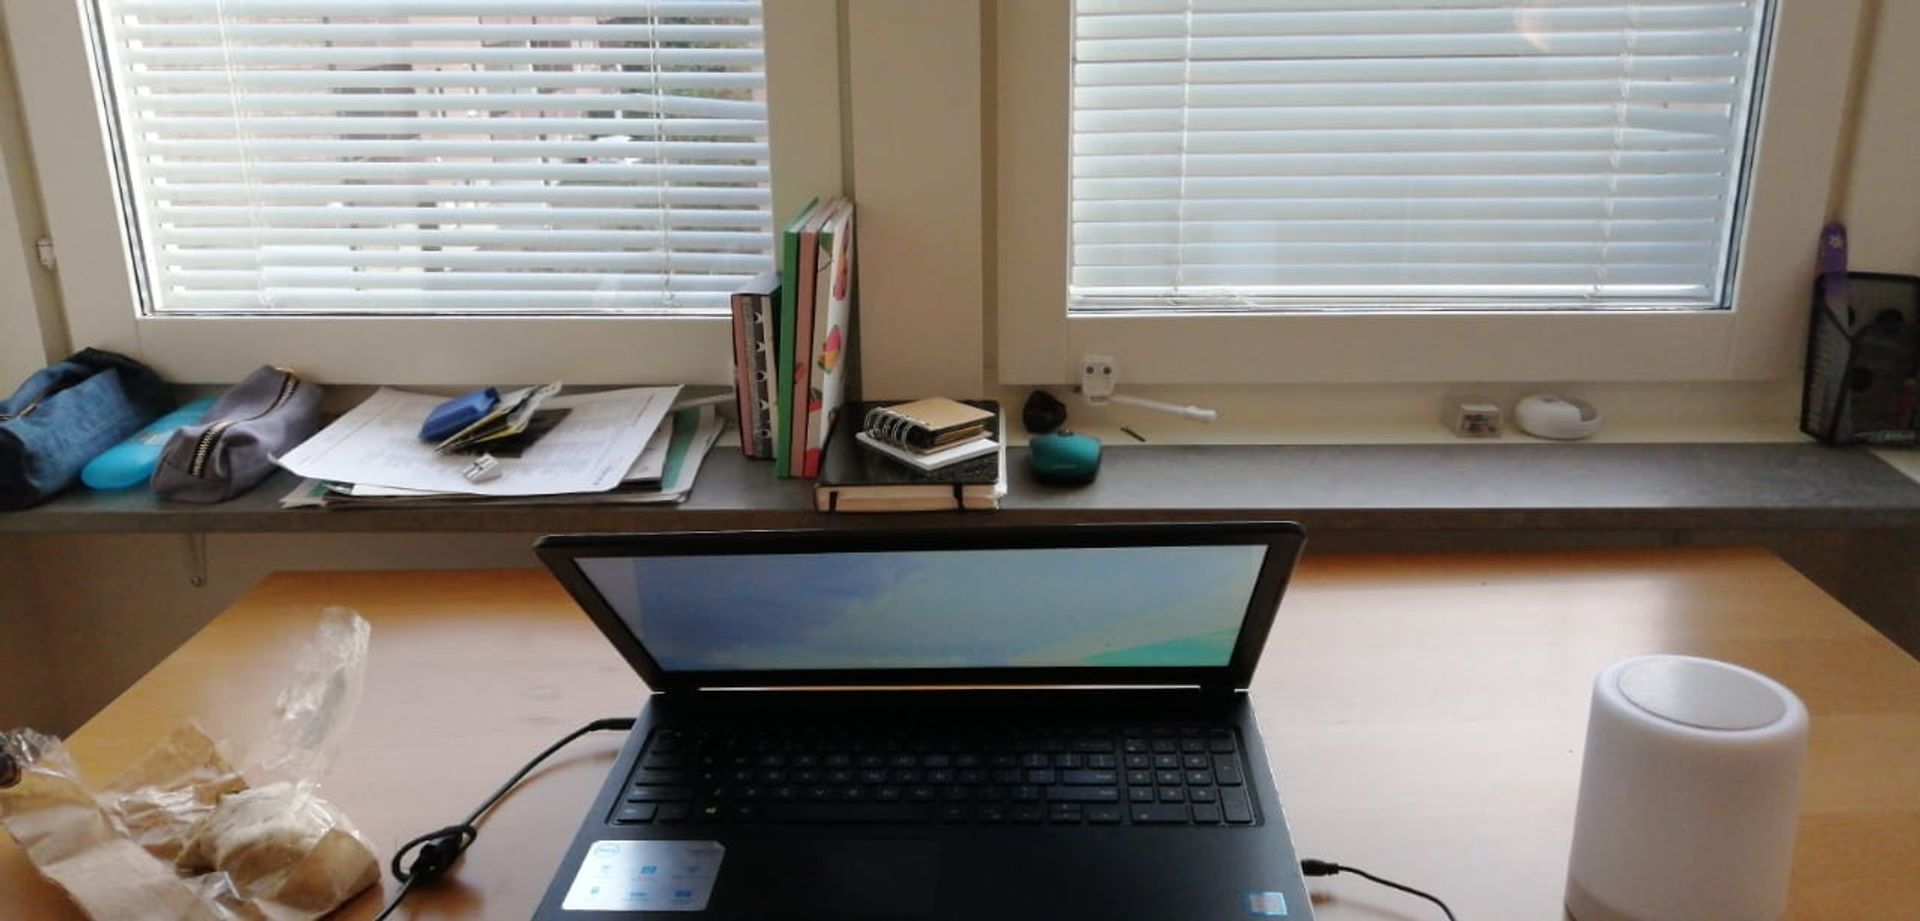 A laptop and a desk